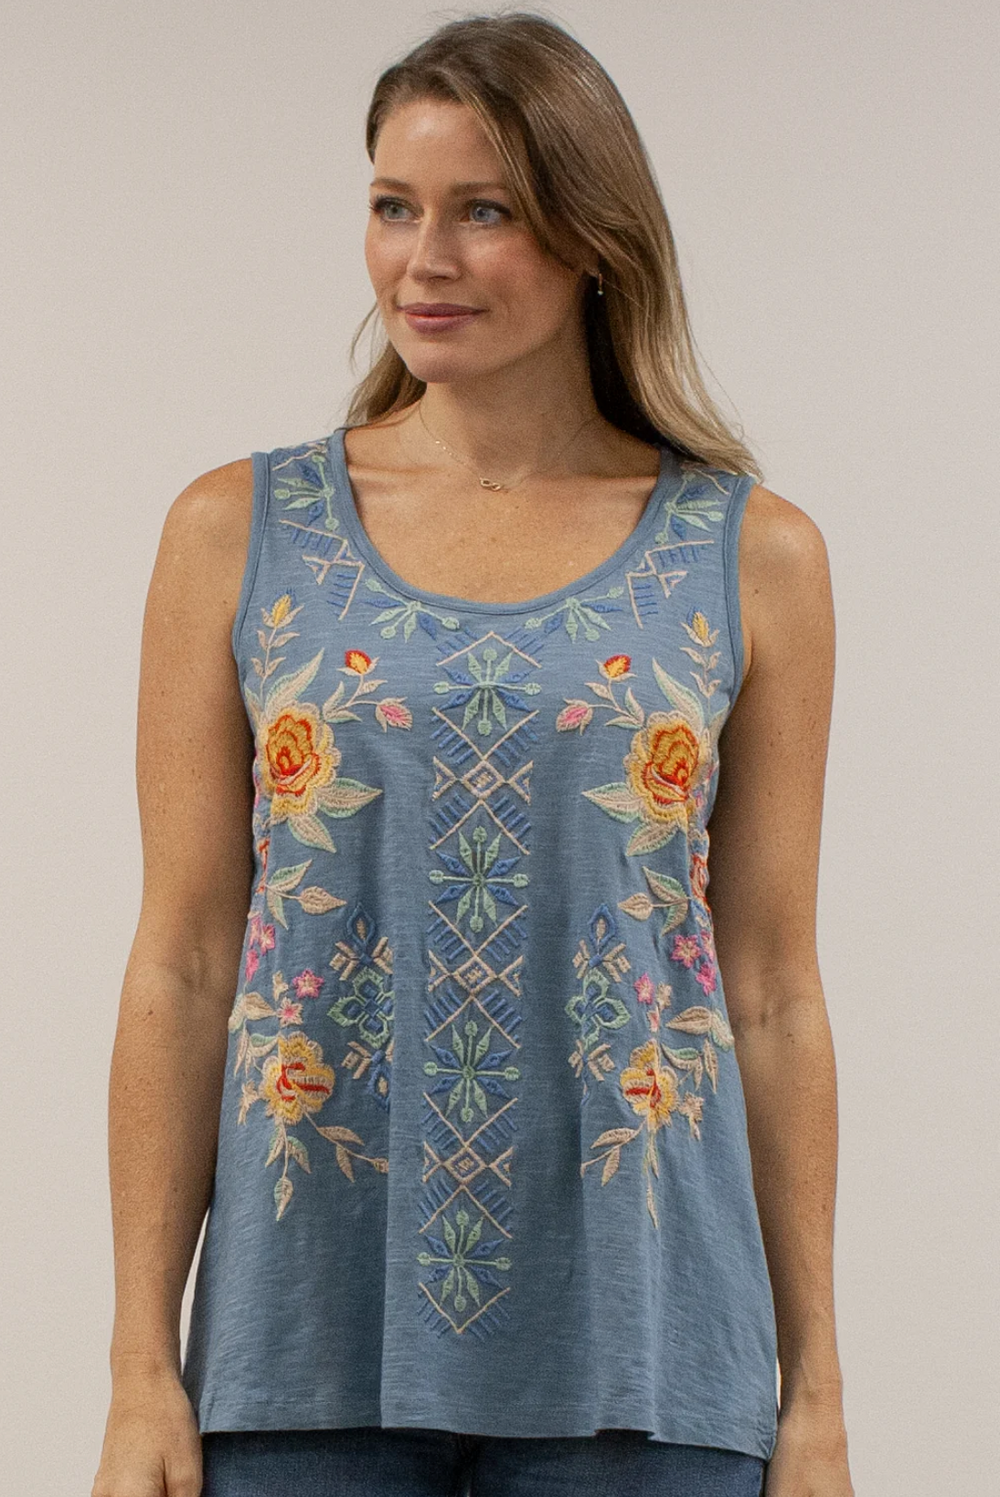 Caite Isa tank, embroidered (2 colors)